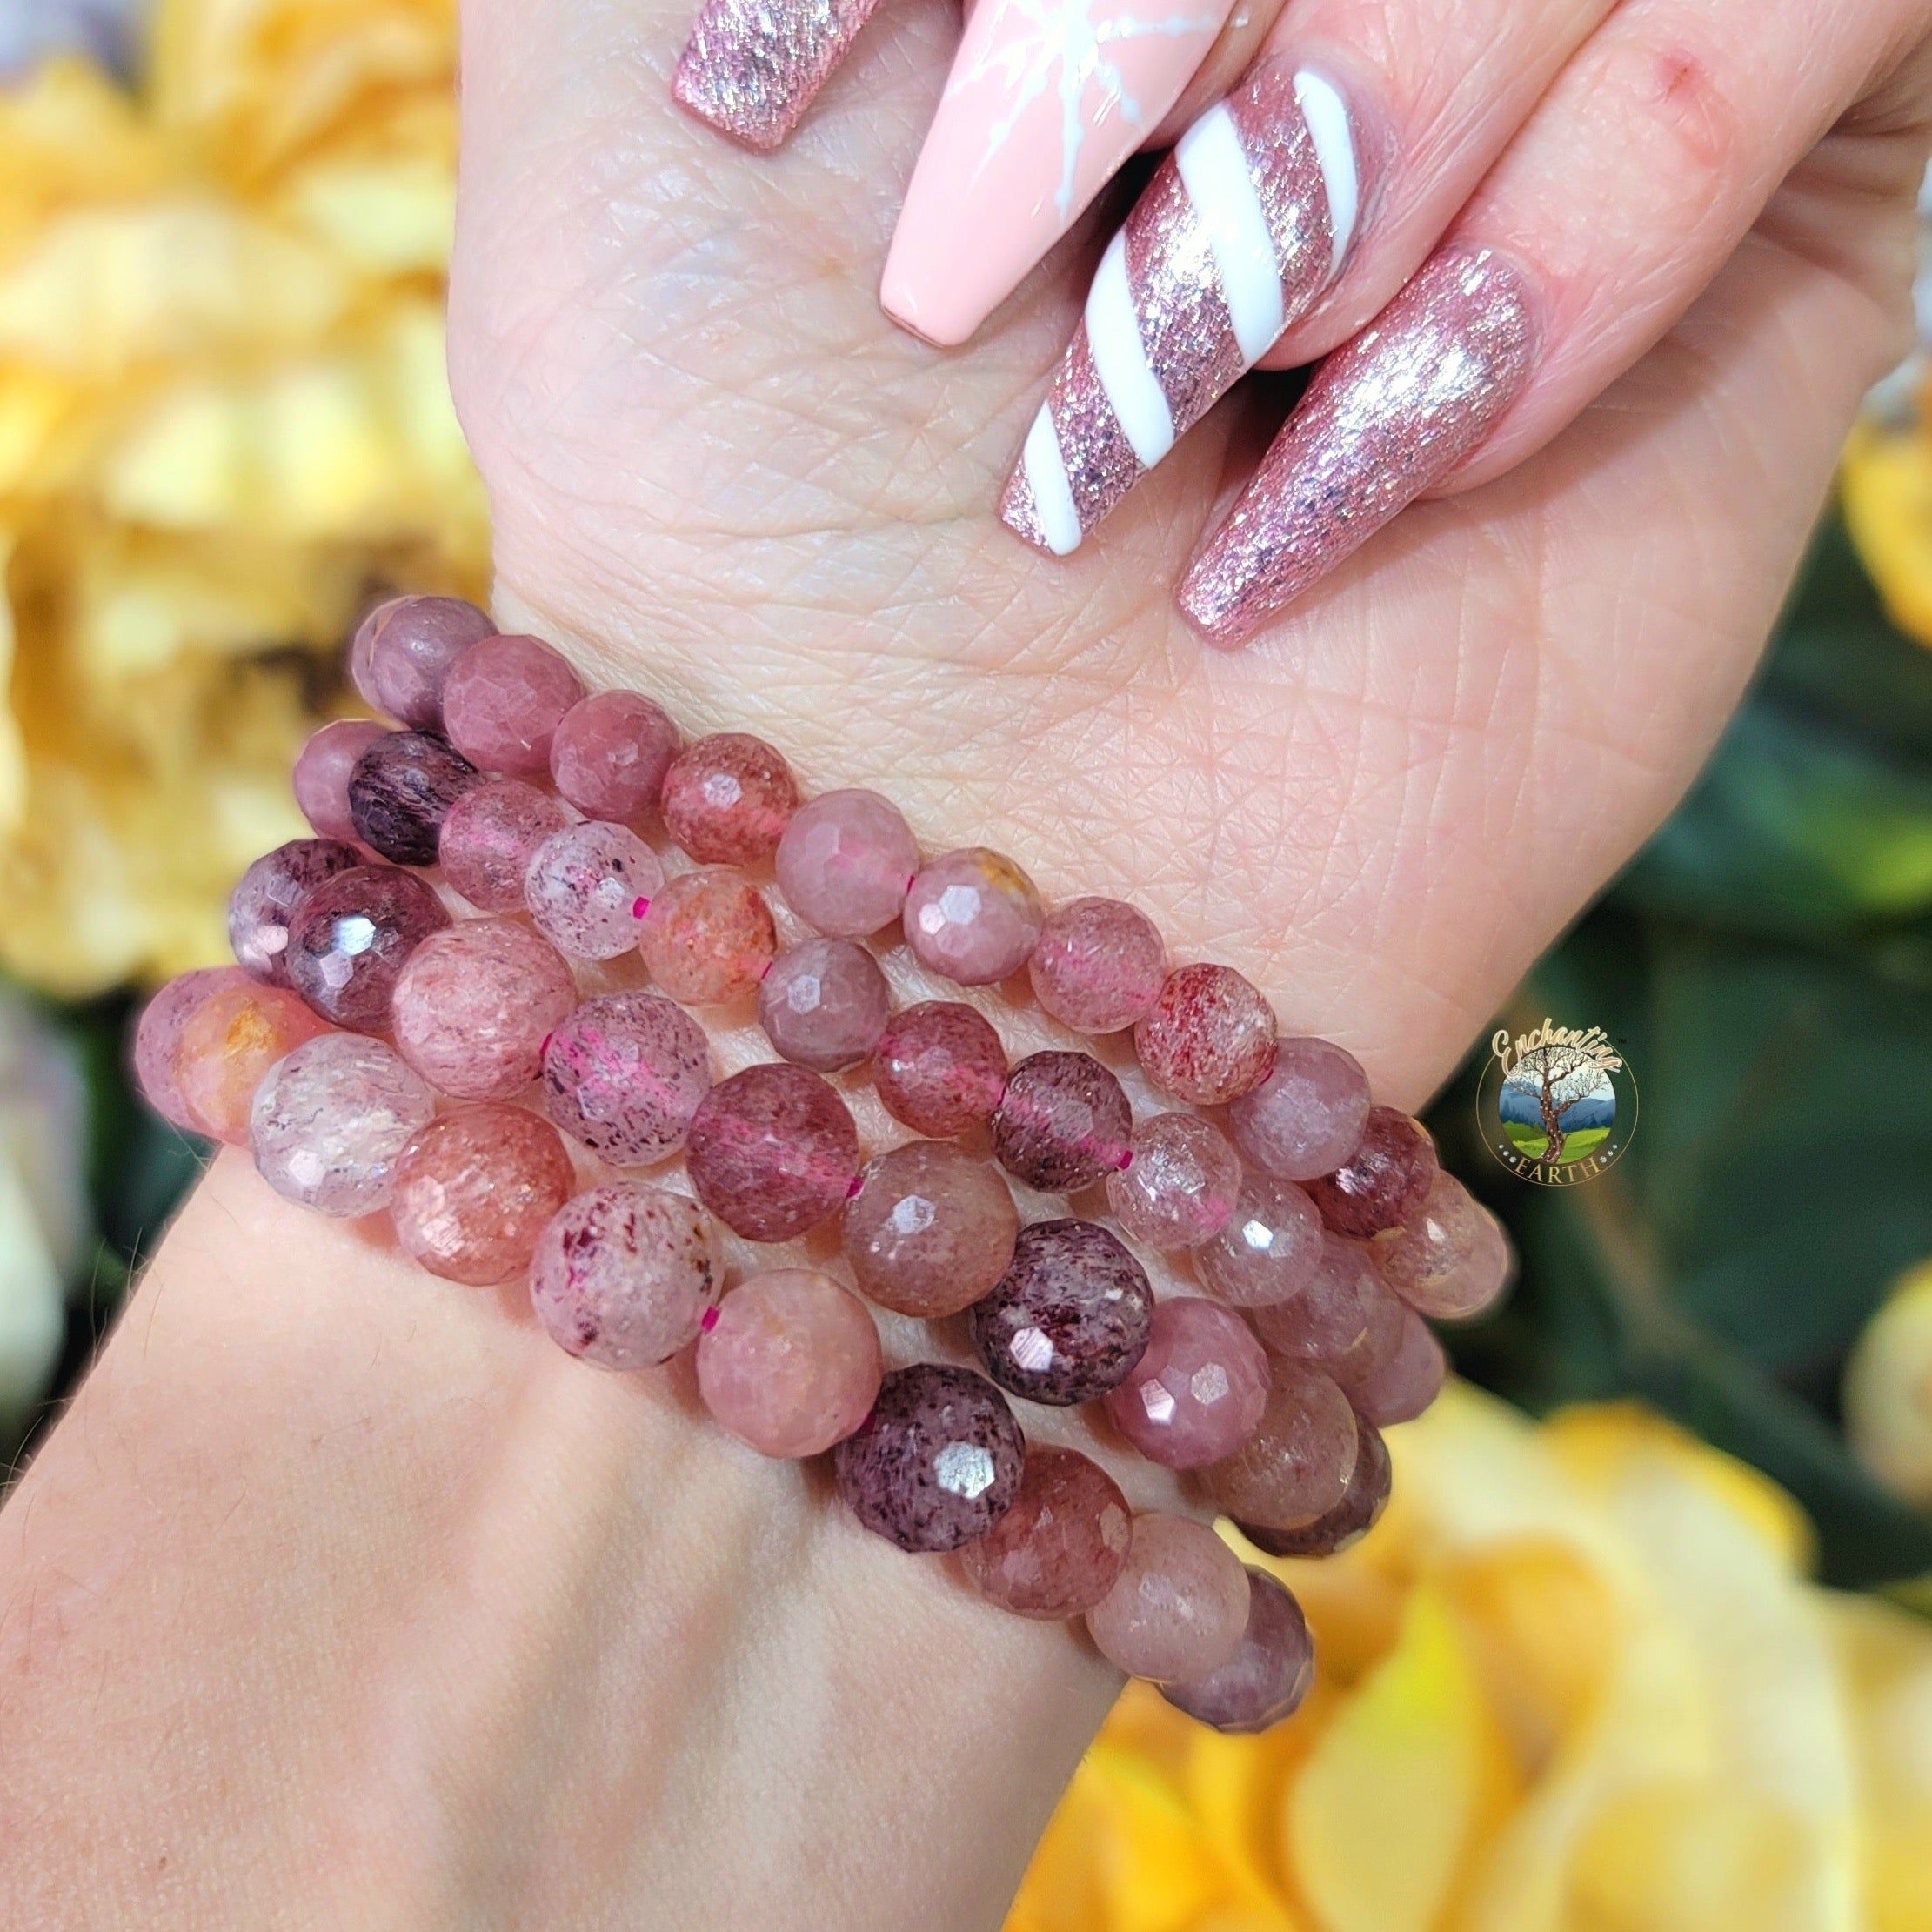 Strawberry Quartz Faceted Bracelet for Joy and Opening Your Heart to the Pleasures of Love